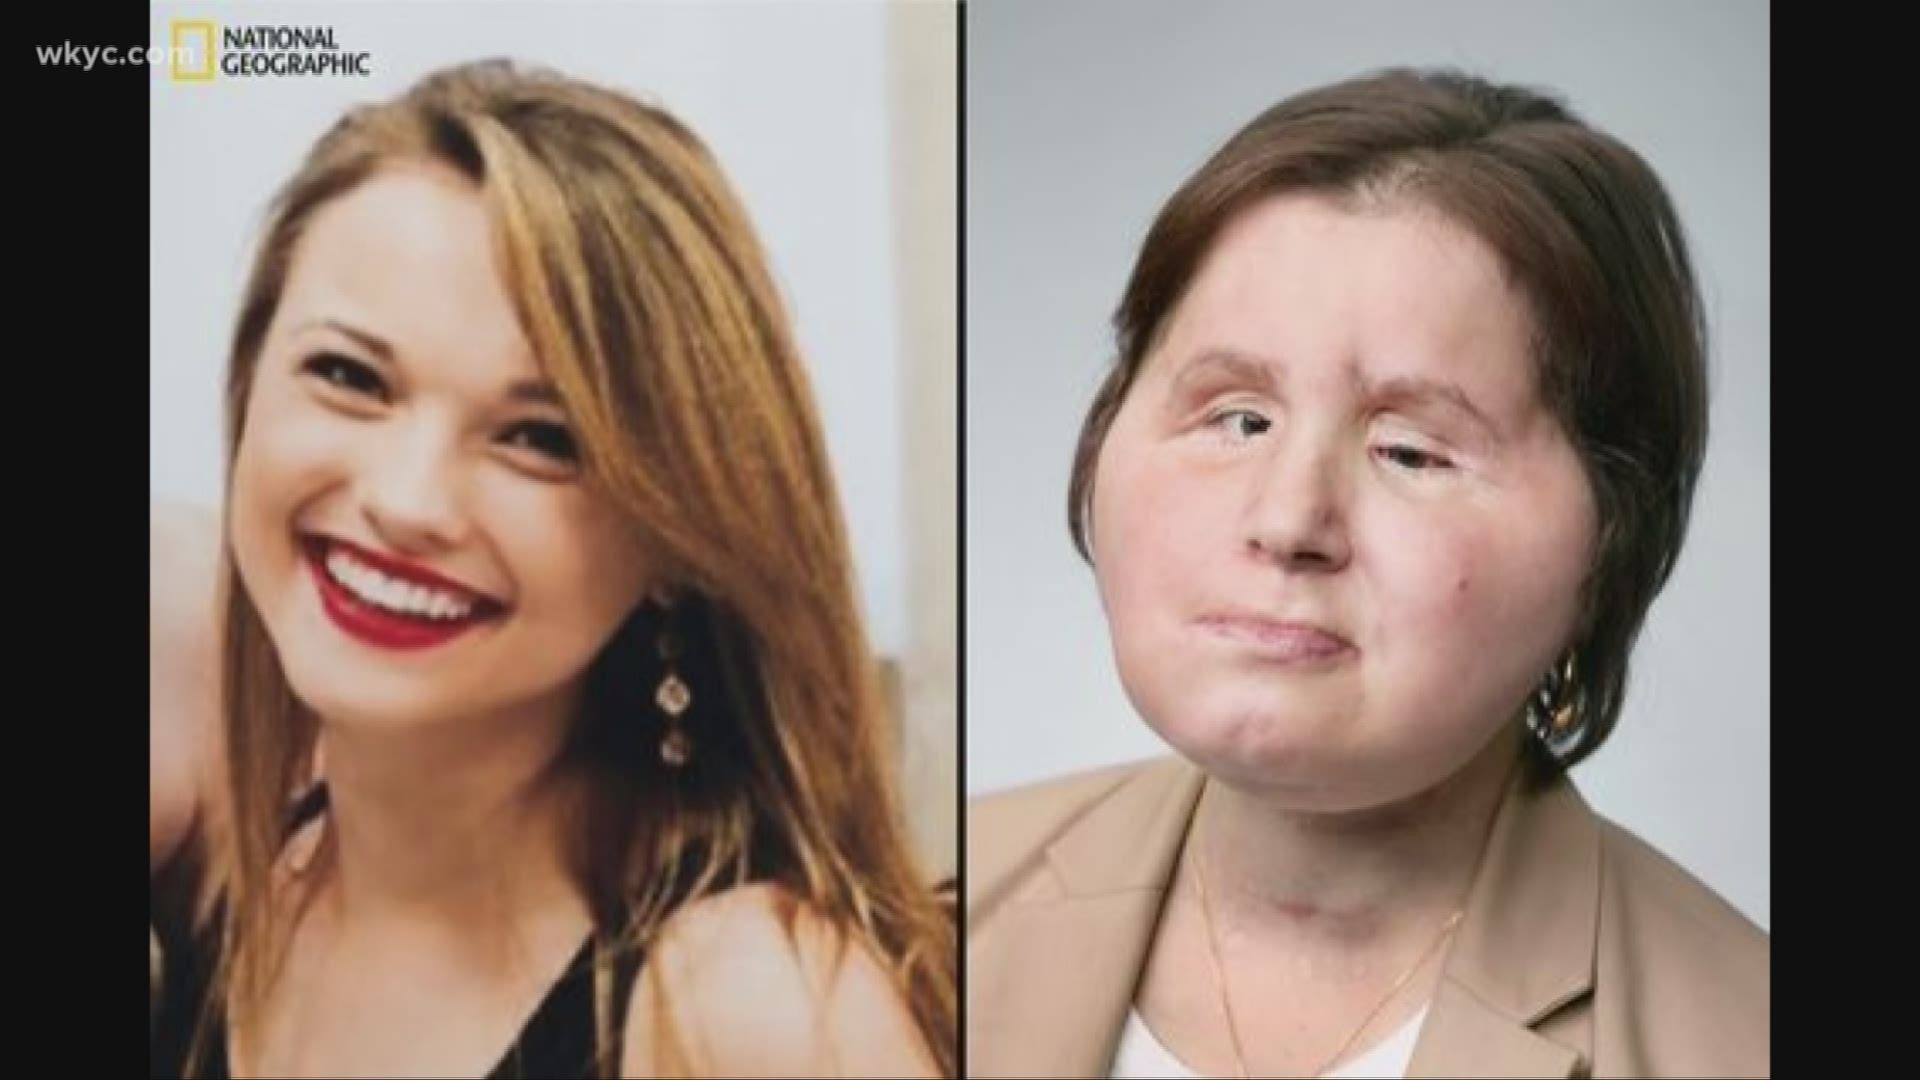 The science behind the youngest face transplant 